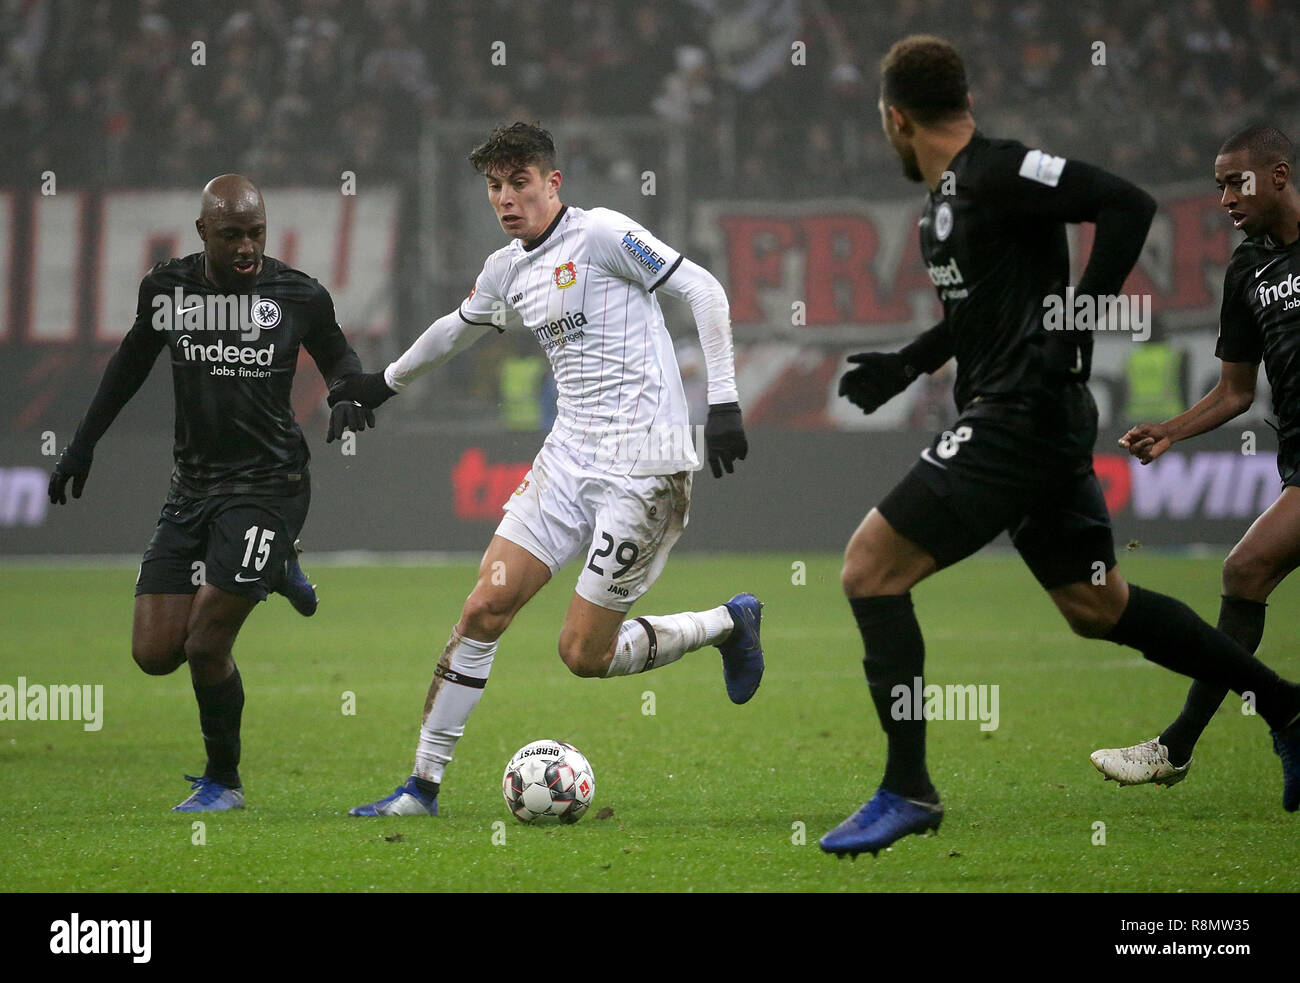 Frankfurt, Germany. 16th Dec 2018. Soccer: Bundesliga, Eintracht Frankfurt - Bayer 04 Leverkusen, 15th matchday, in the Commerzbank Arena. Simon Falette (r) from Frankfurt in a duel with Kai Havertz (M) from Leverkusen. On the left runs Jetro Willems (Frankfurt). Photo: Hasan Bratic/dpa - IMPORTANT NOTE: In accordance with the requirements of the DFL Deutsche Fußball Liga or the DFB Deutscher Fußball-Bund, it is prohibited to use or have used photographs taken in the stadium and/or the match in the form of sequence images and/or video-like photo sequences. Credit: dpa picture alliance/Alamy Li Stock Photo